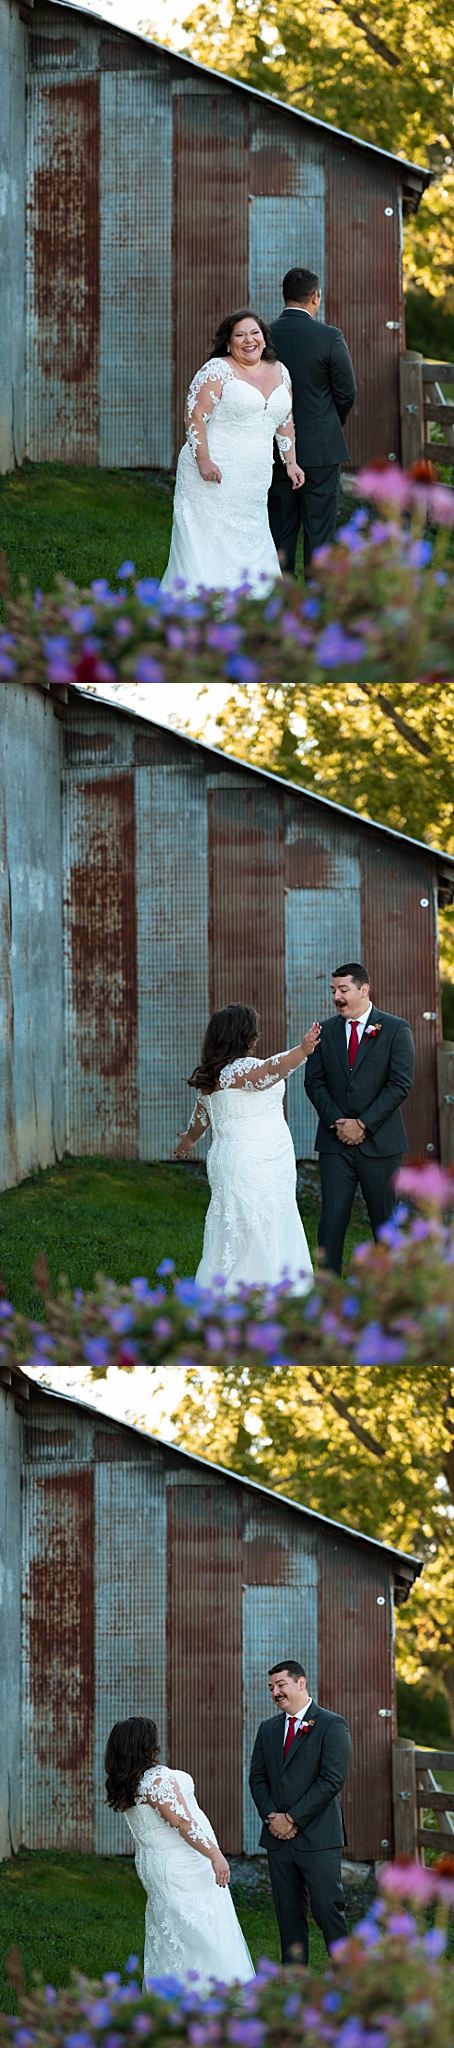 bride taps groom on shoulder to see her for the first time by Hannah Louise Photo